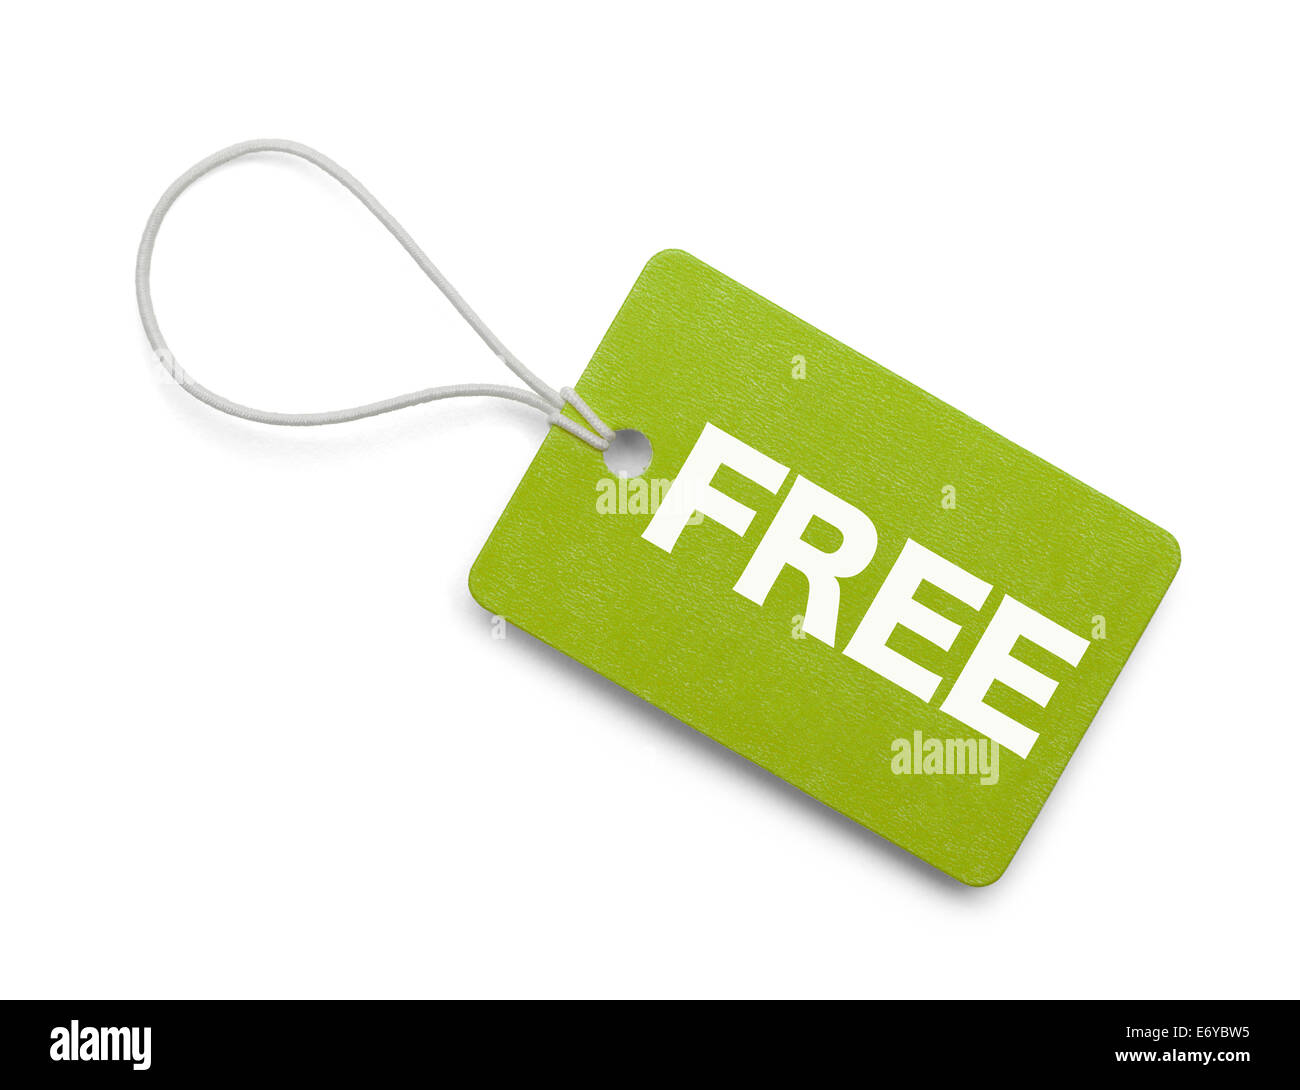 Green Free Hang Tag Isolated on White Background. Stock Photo